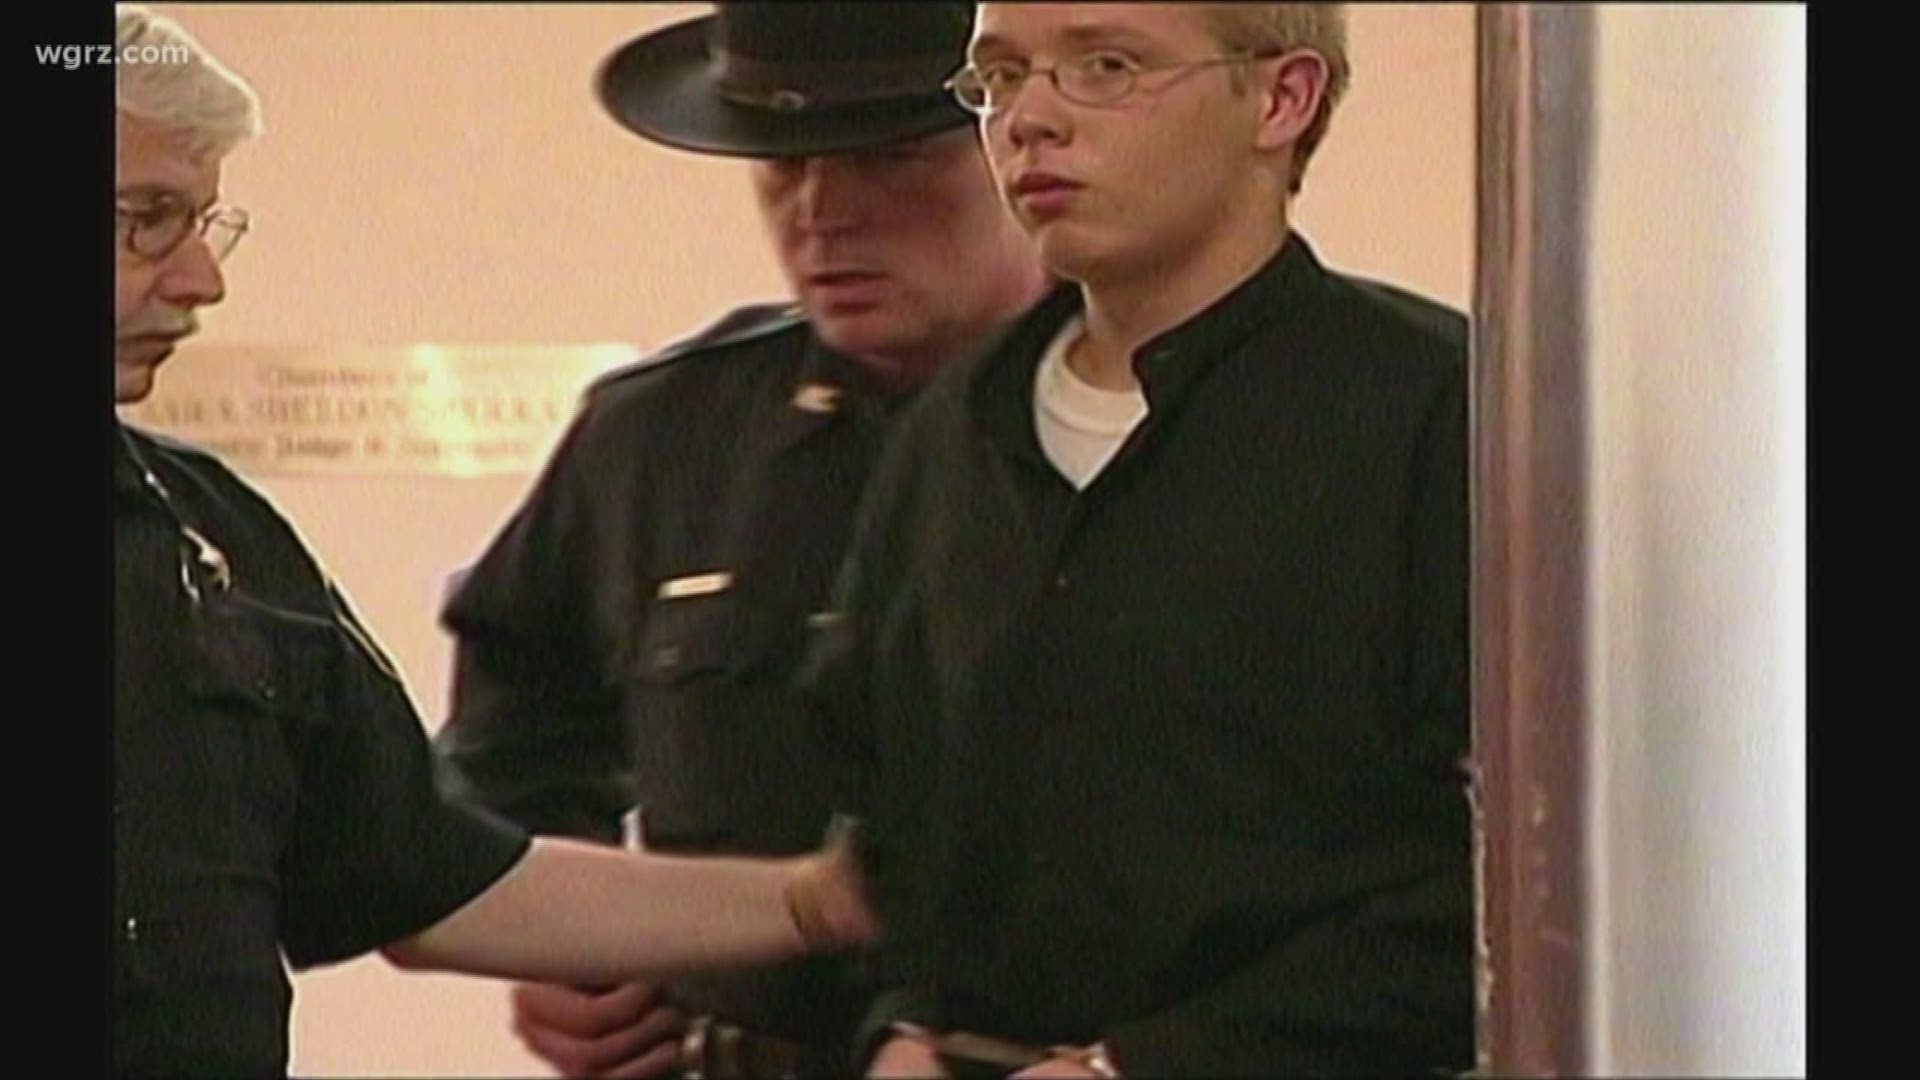 A teenager who admitted to playing a role in a brutal 2002 murder in Niagara Falls is being released from prison on parole.